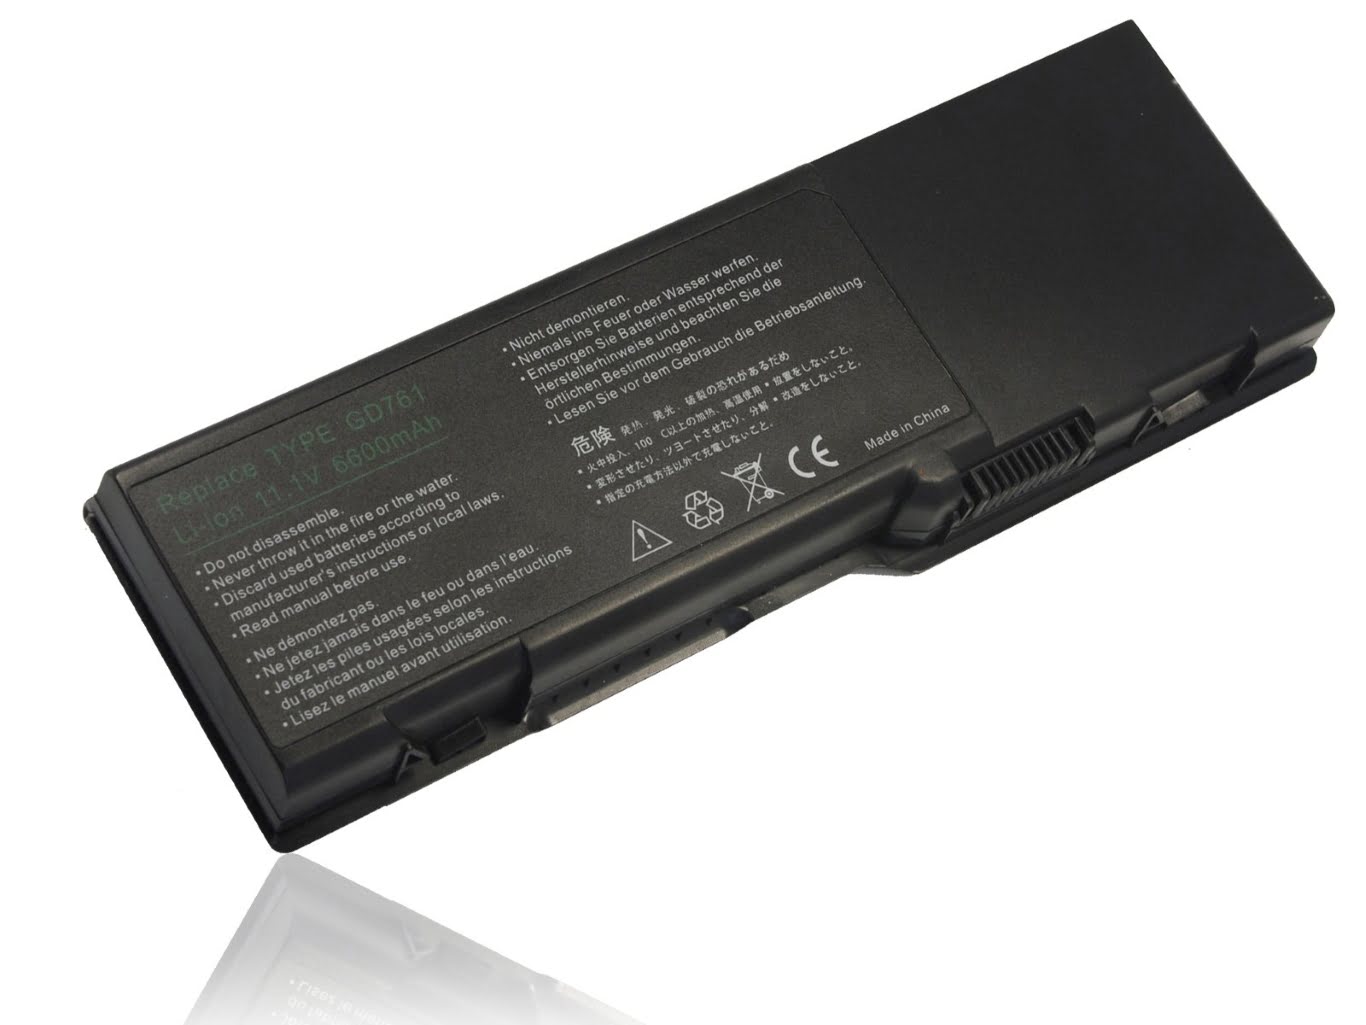 0CR174, 0GD761 replacement Laptop Battery for Dell Inspiron 1501, Inspiron 6400, 11.1V, 6600mAh